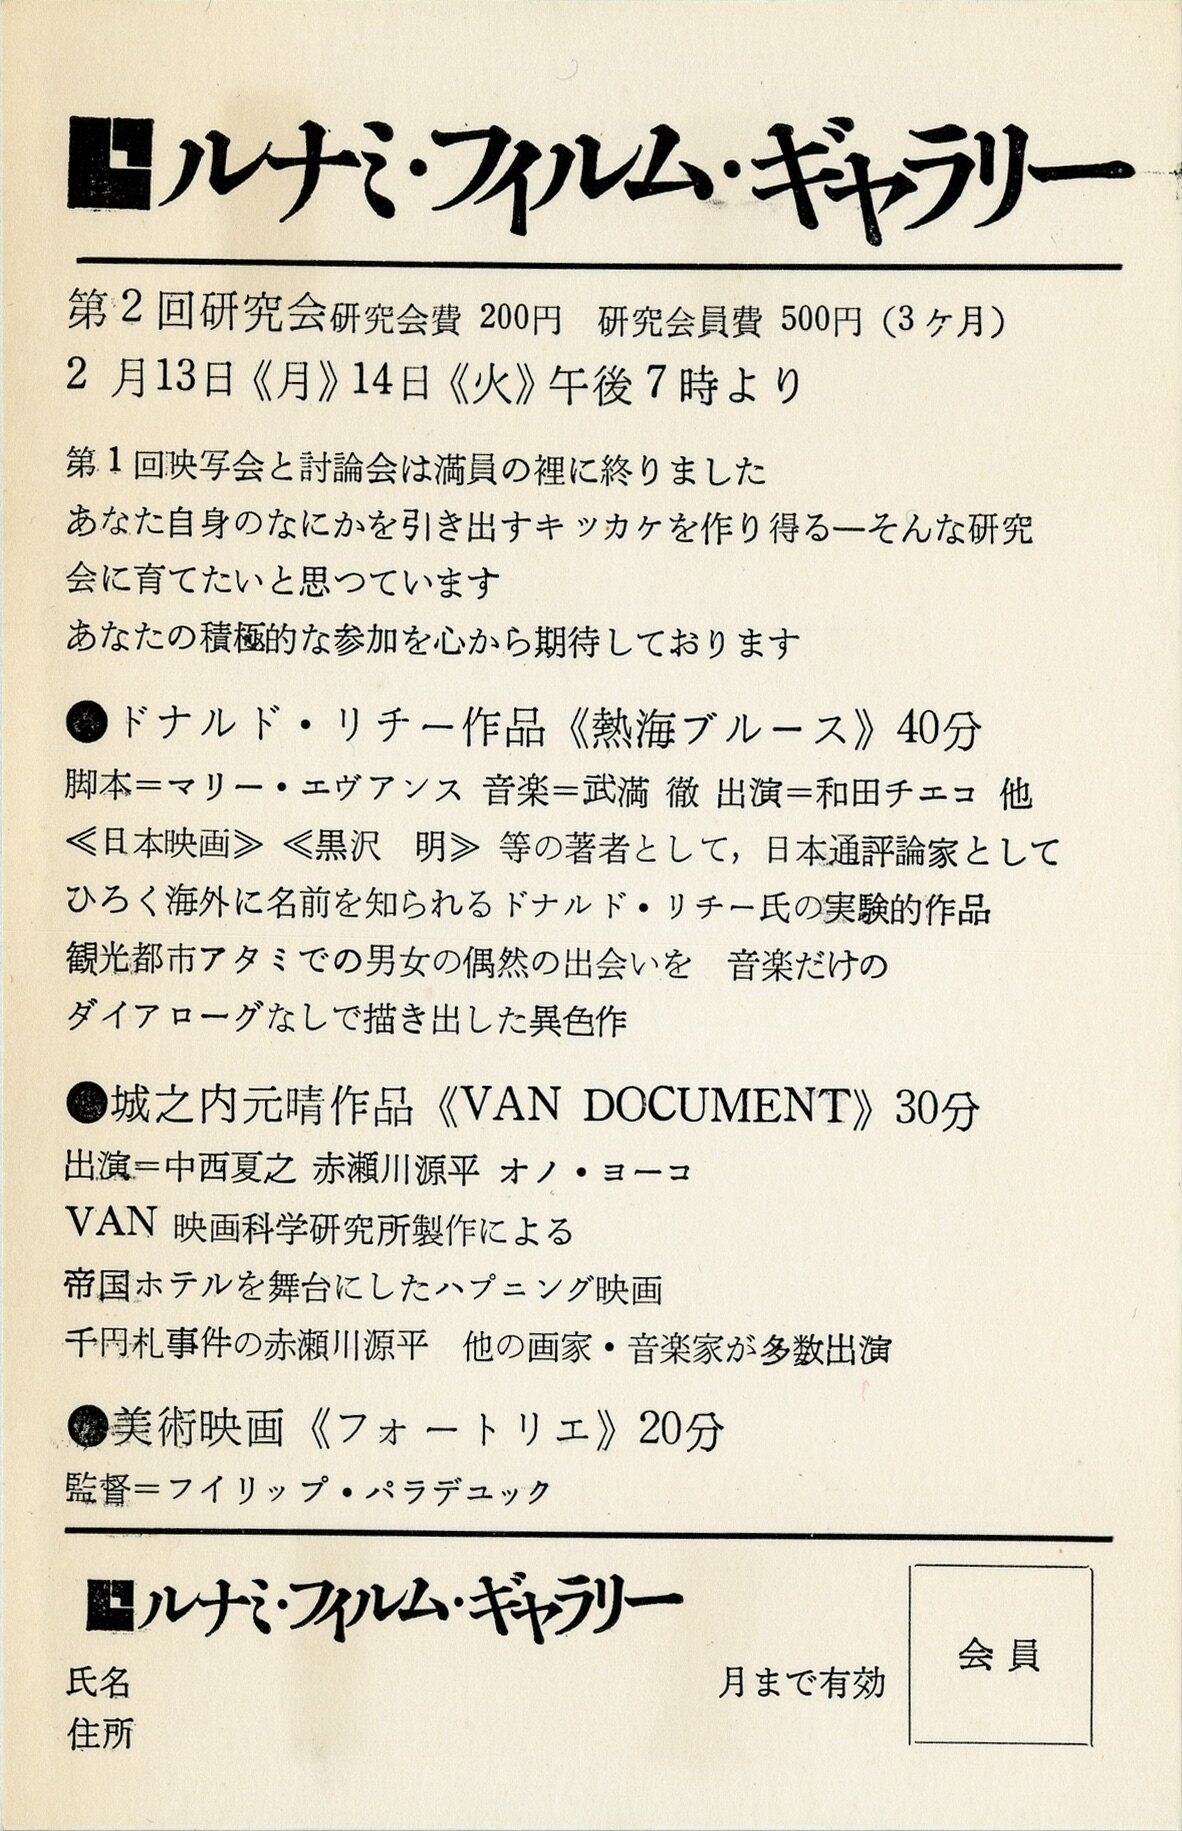  Flyer for  Intermedia , 1967, Scanned reference material. Collection of Emiko Namikawa 